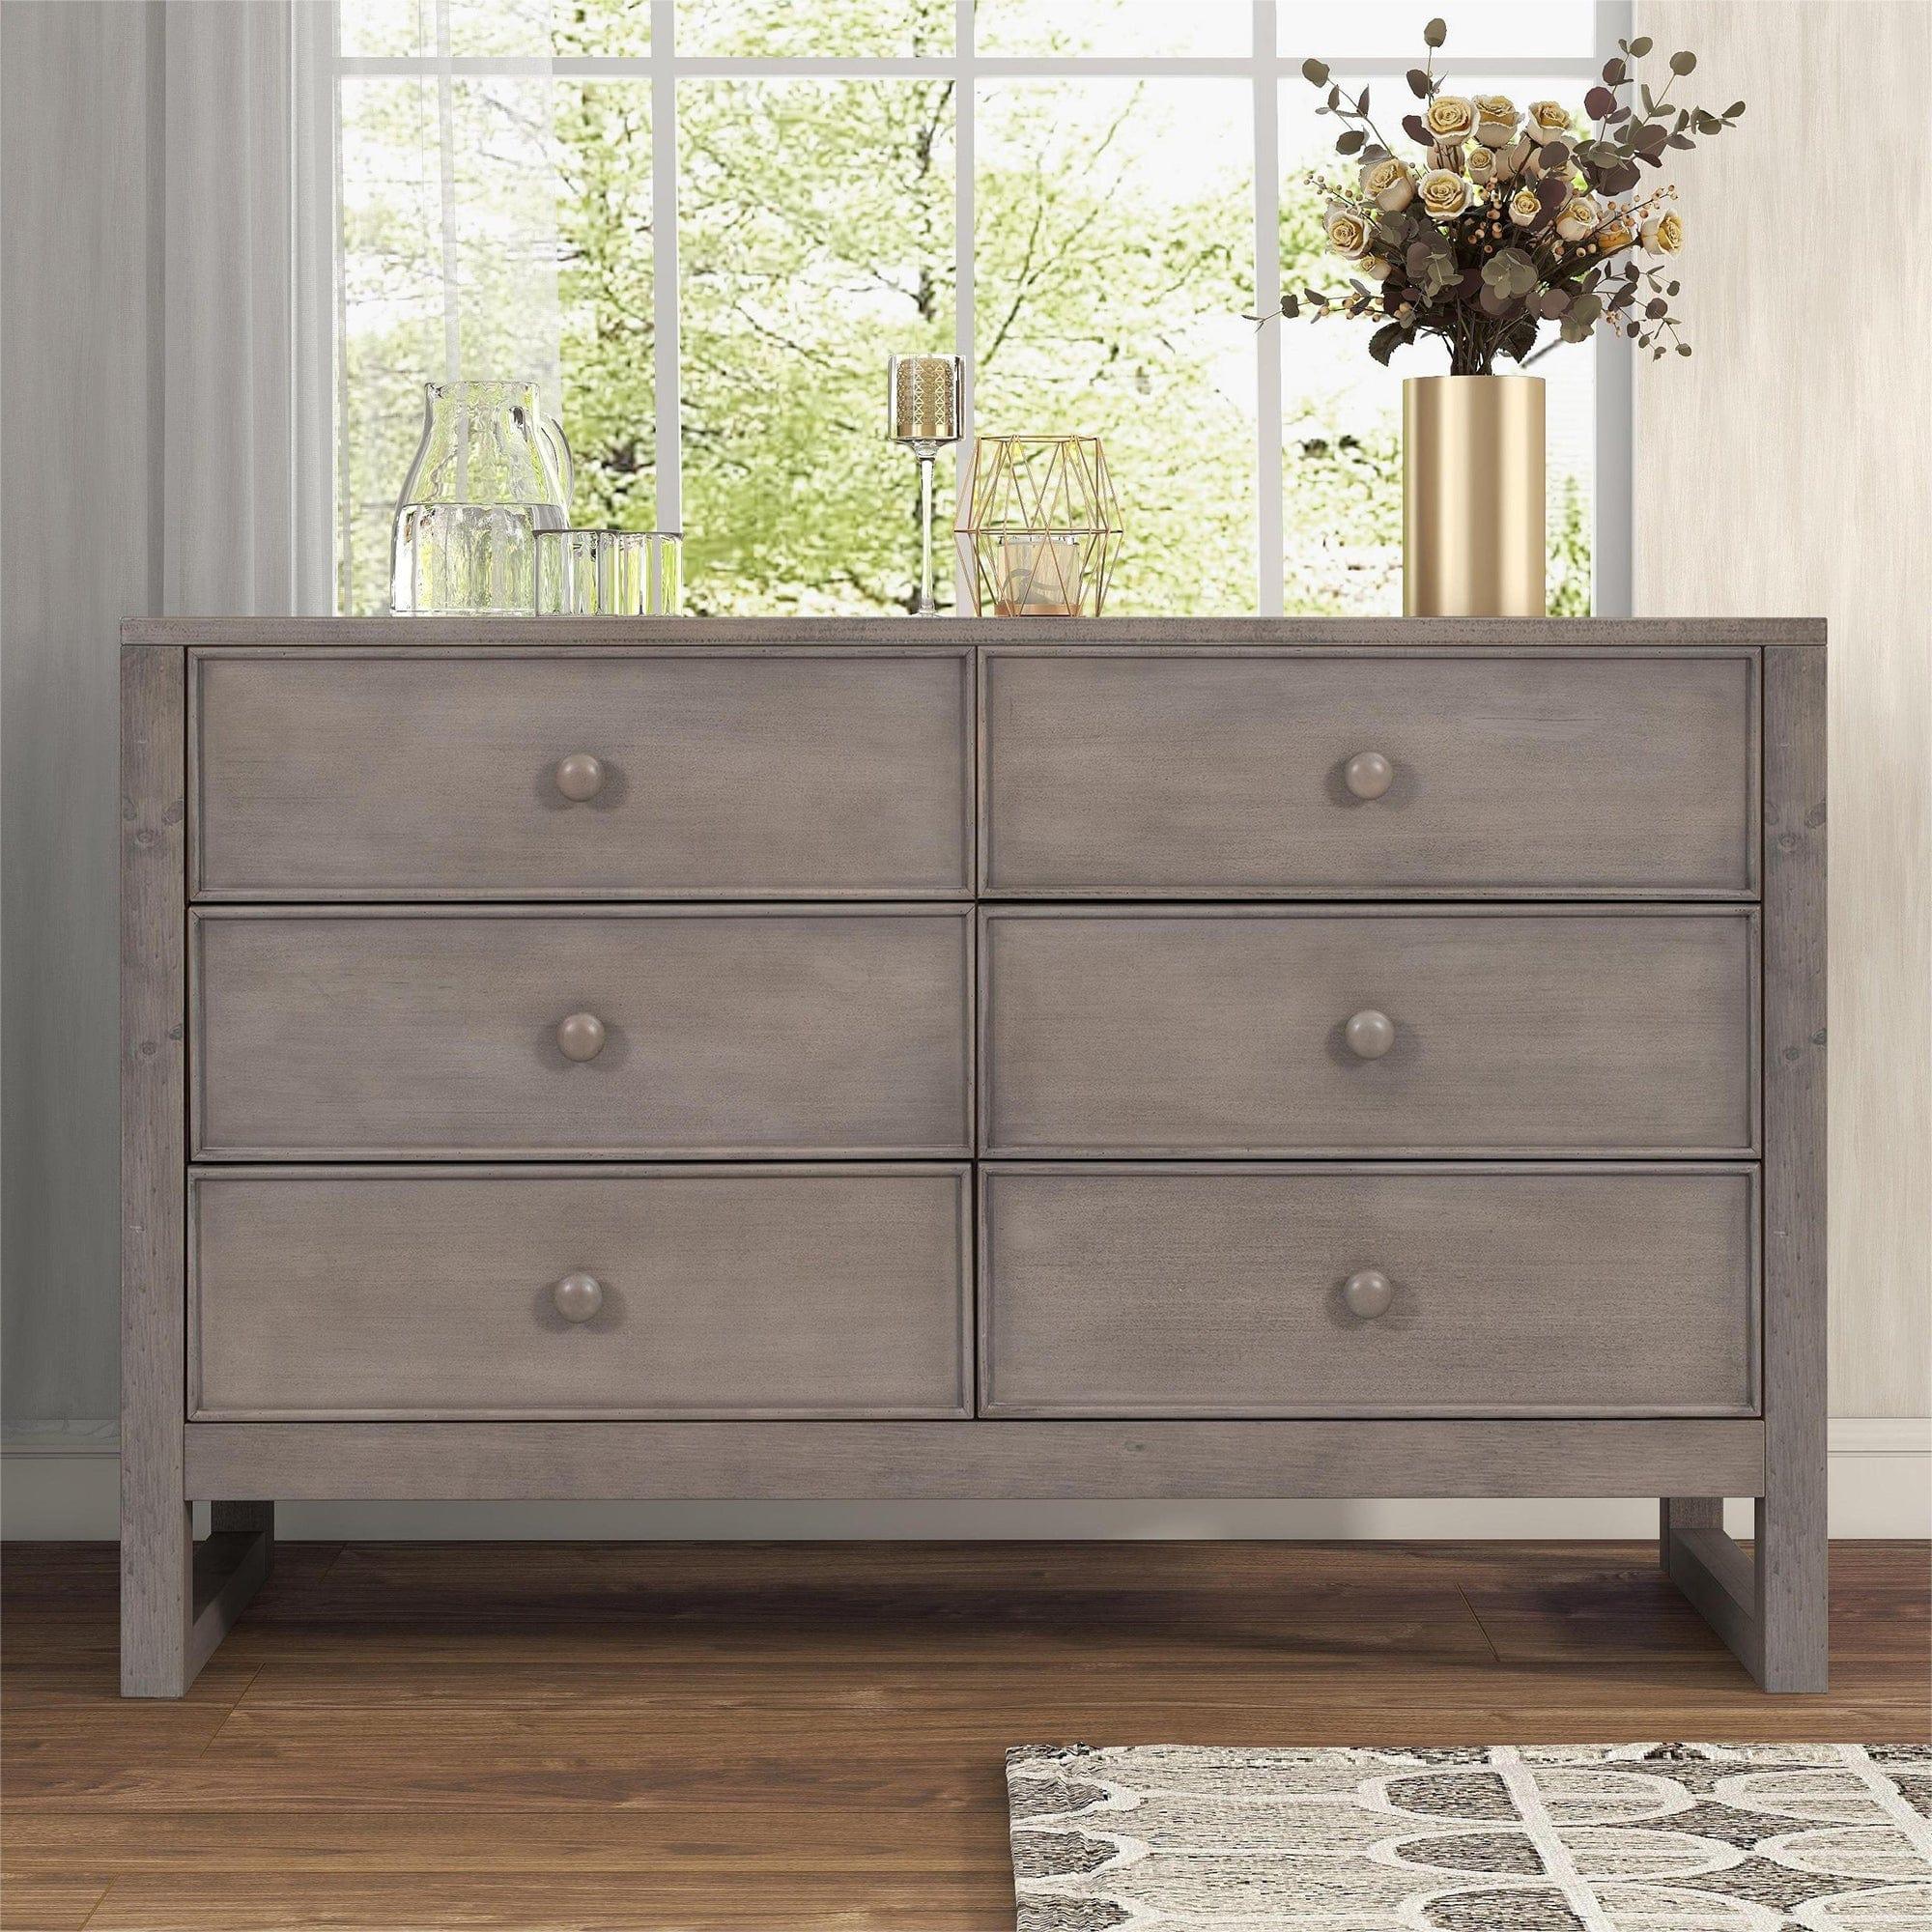 Shop Rustic Wooden Dresser with 6 Drawers,Storage Cabinet for Bedroom,Anitque Gray Mademoiselle Home Decor